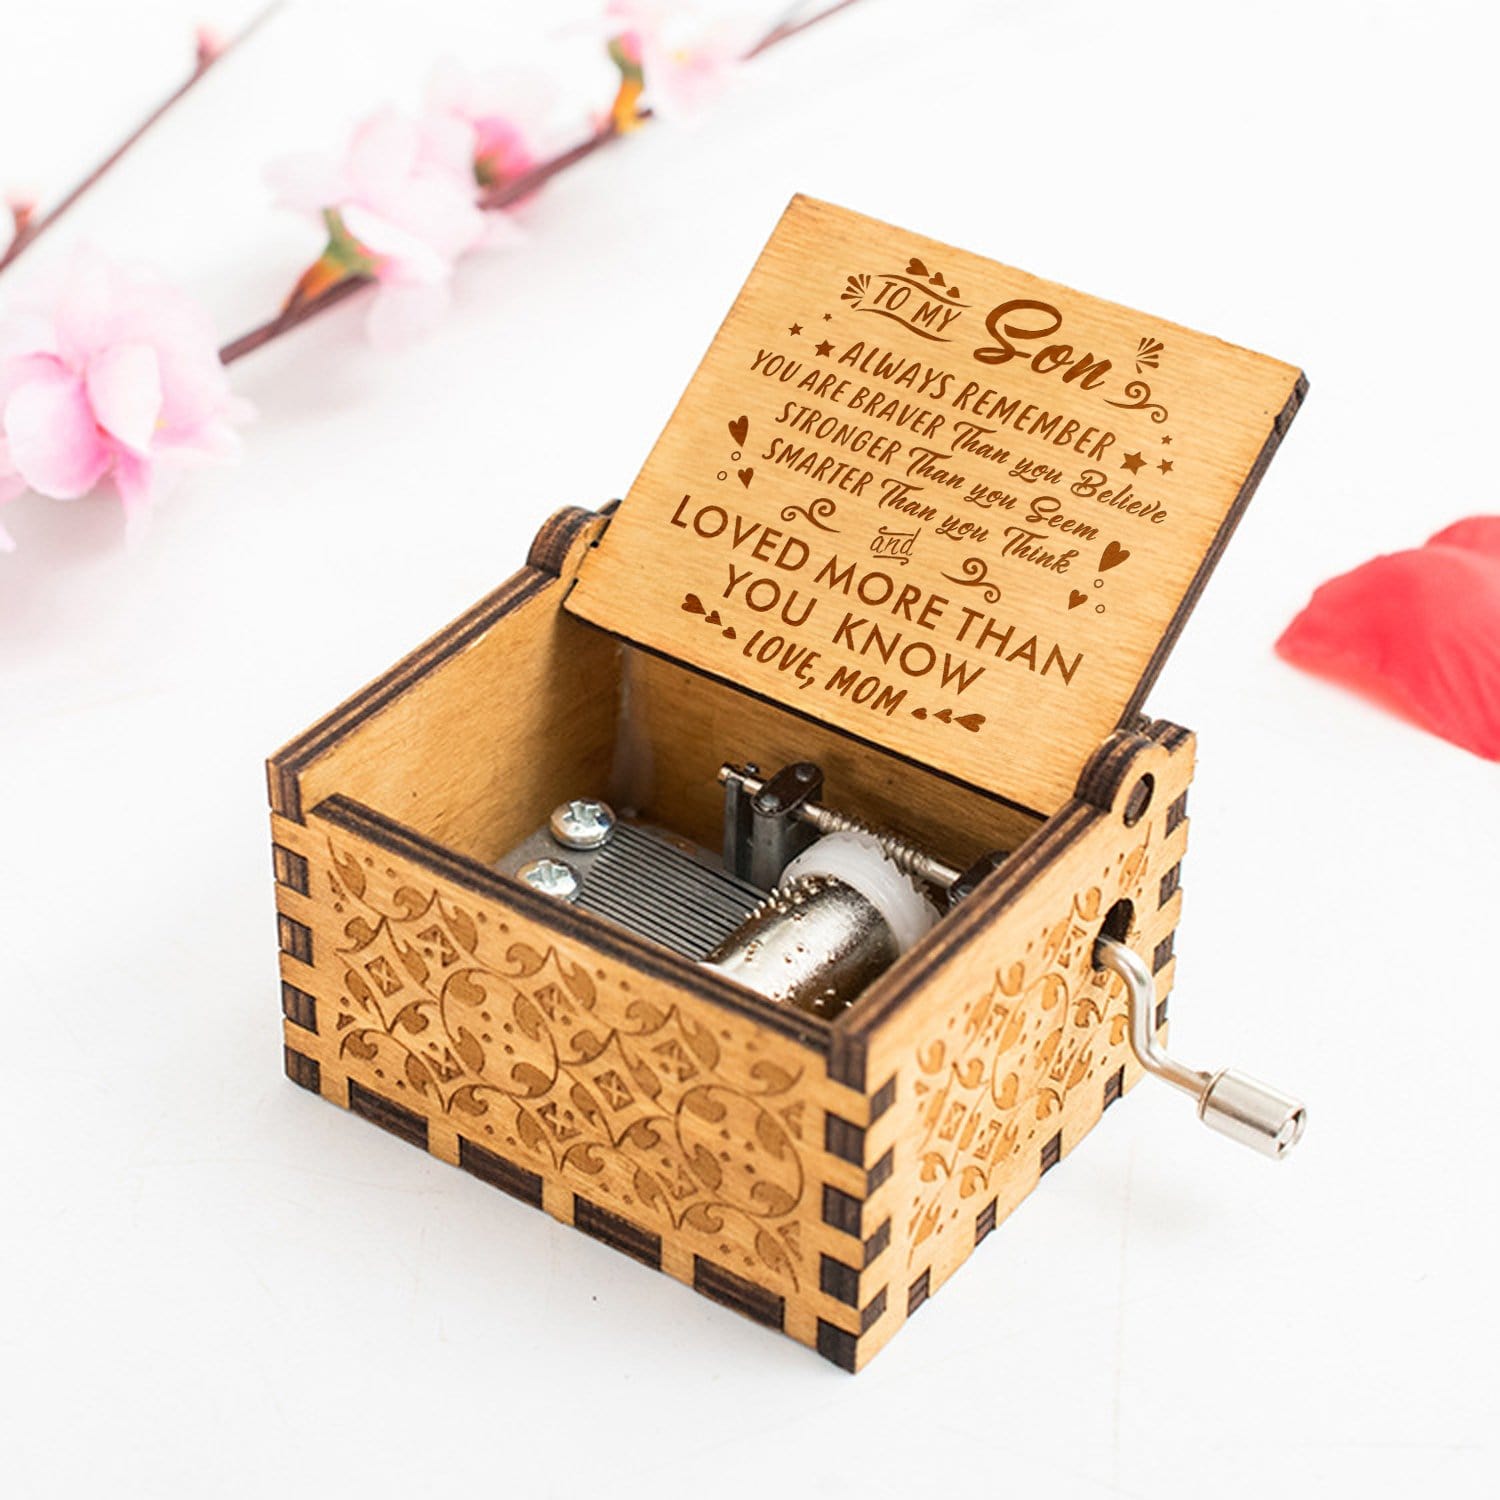 Music Box Mom To My Son You Are Loved More Than You Know Engraved Wooden Music Box GiveMe-Gifts